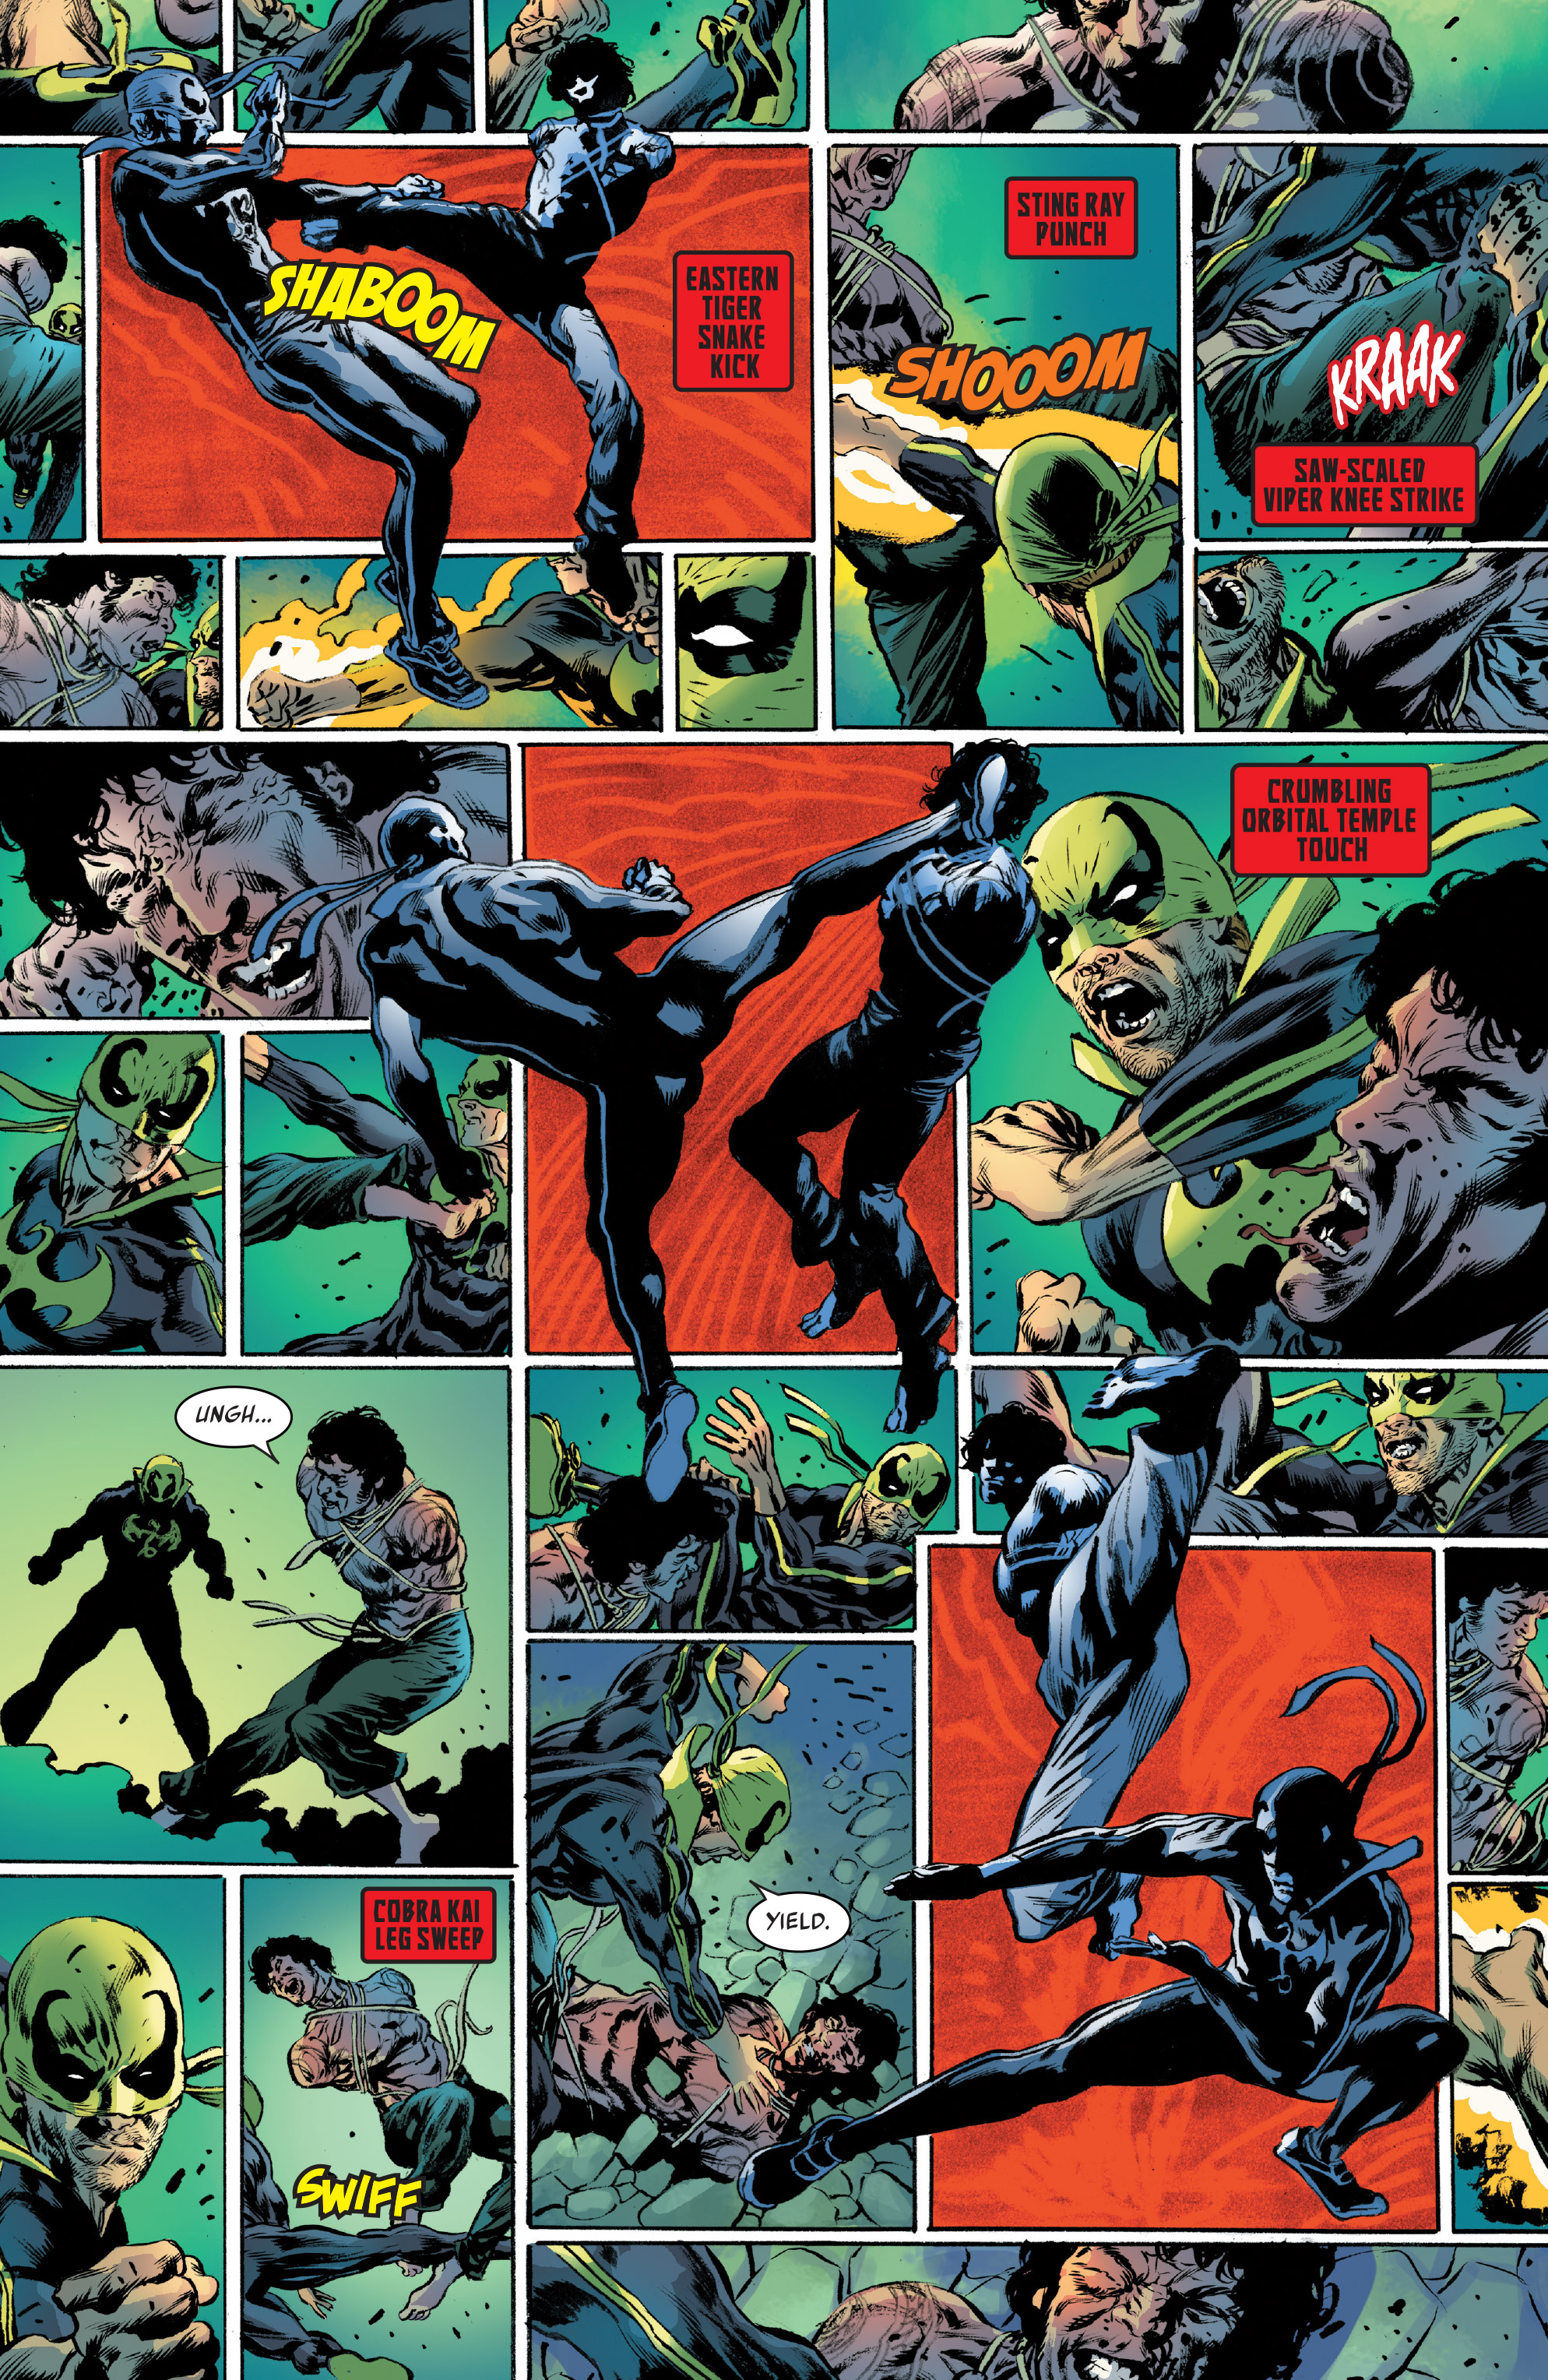 Iron Fist (2017-): Chapter 3 - Page 17